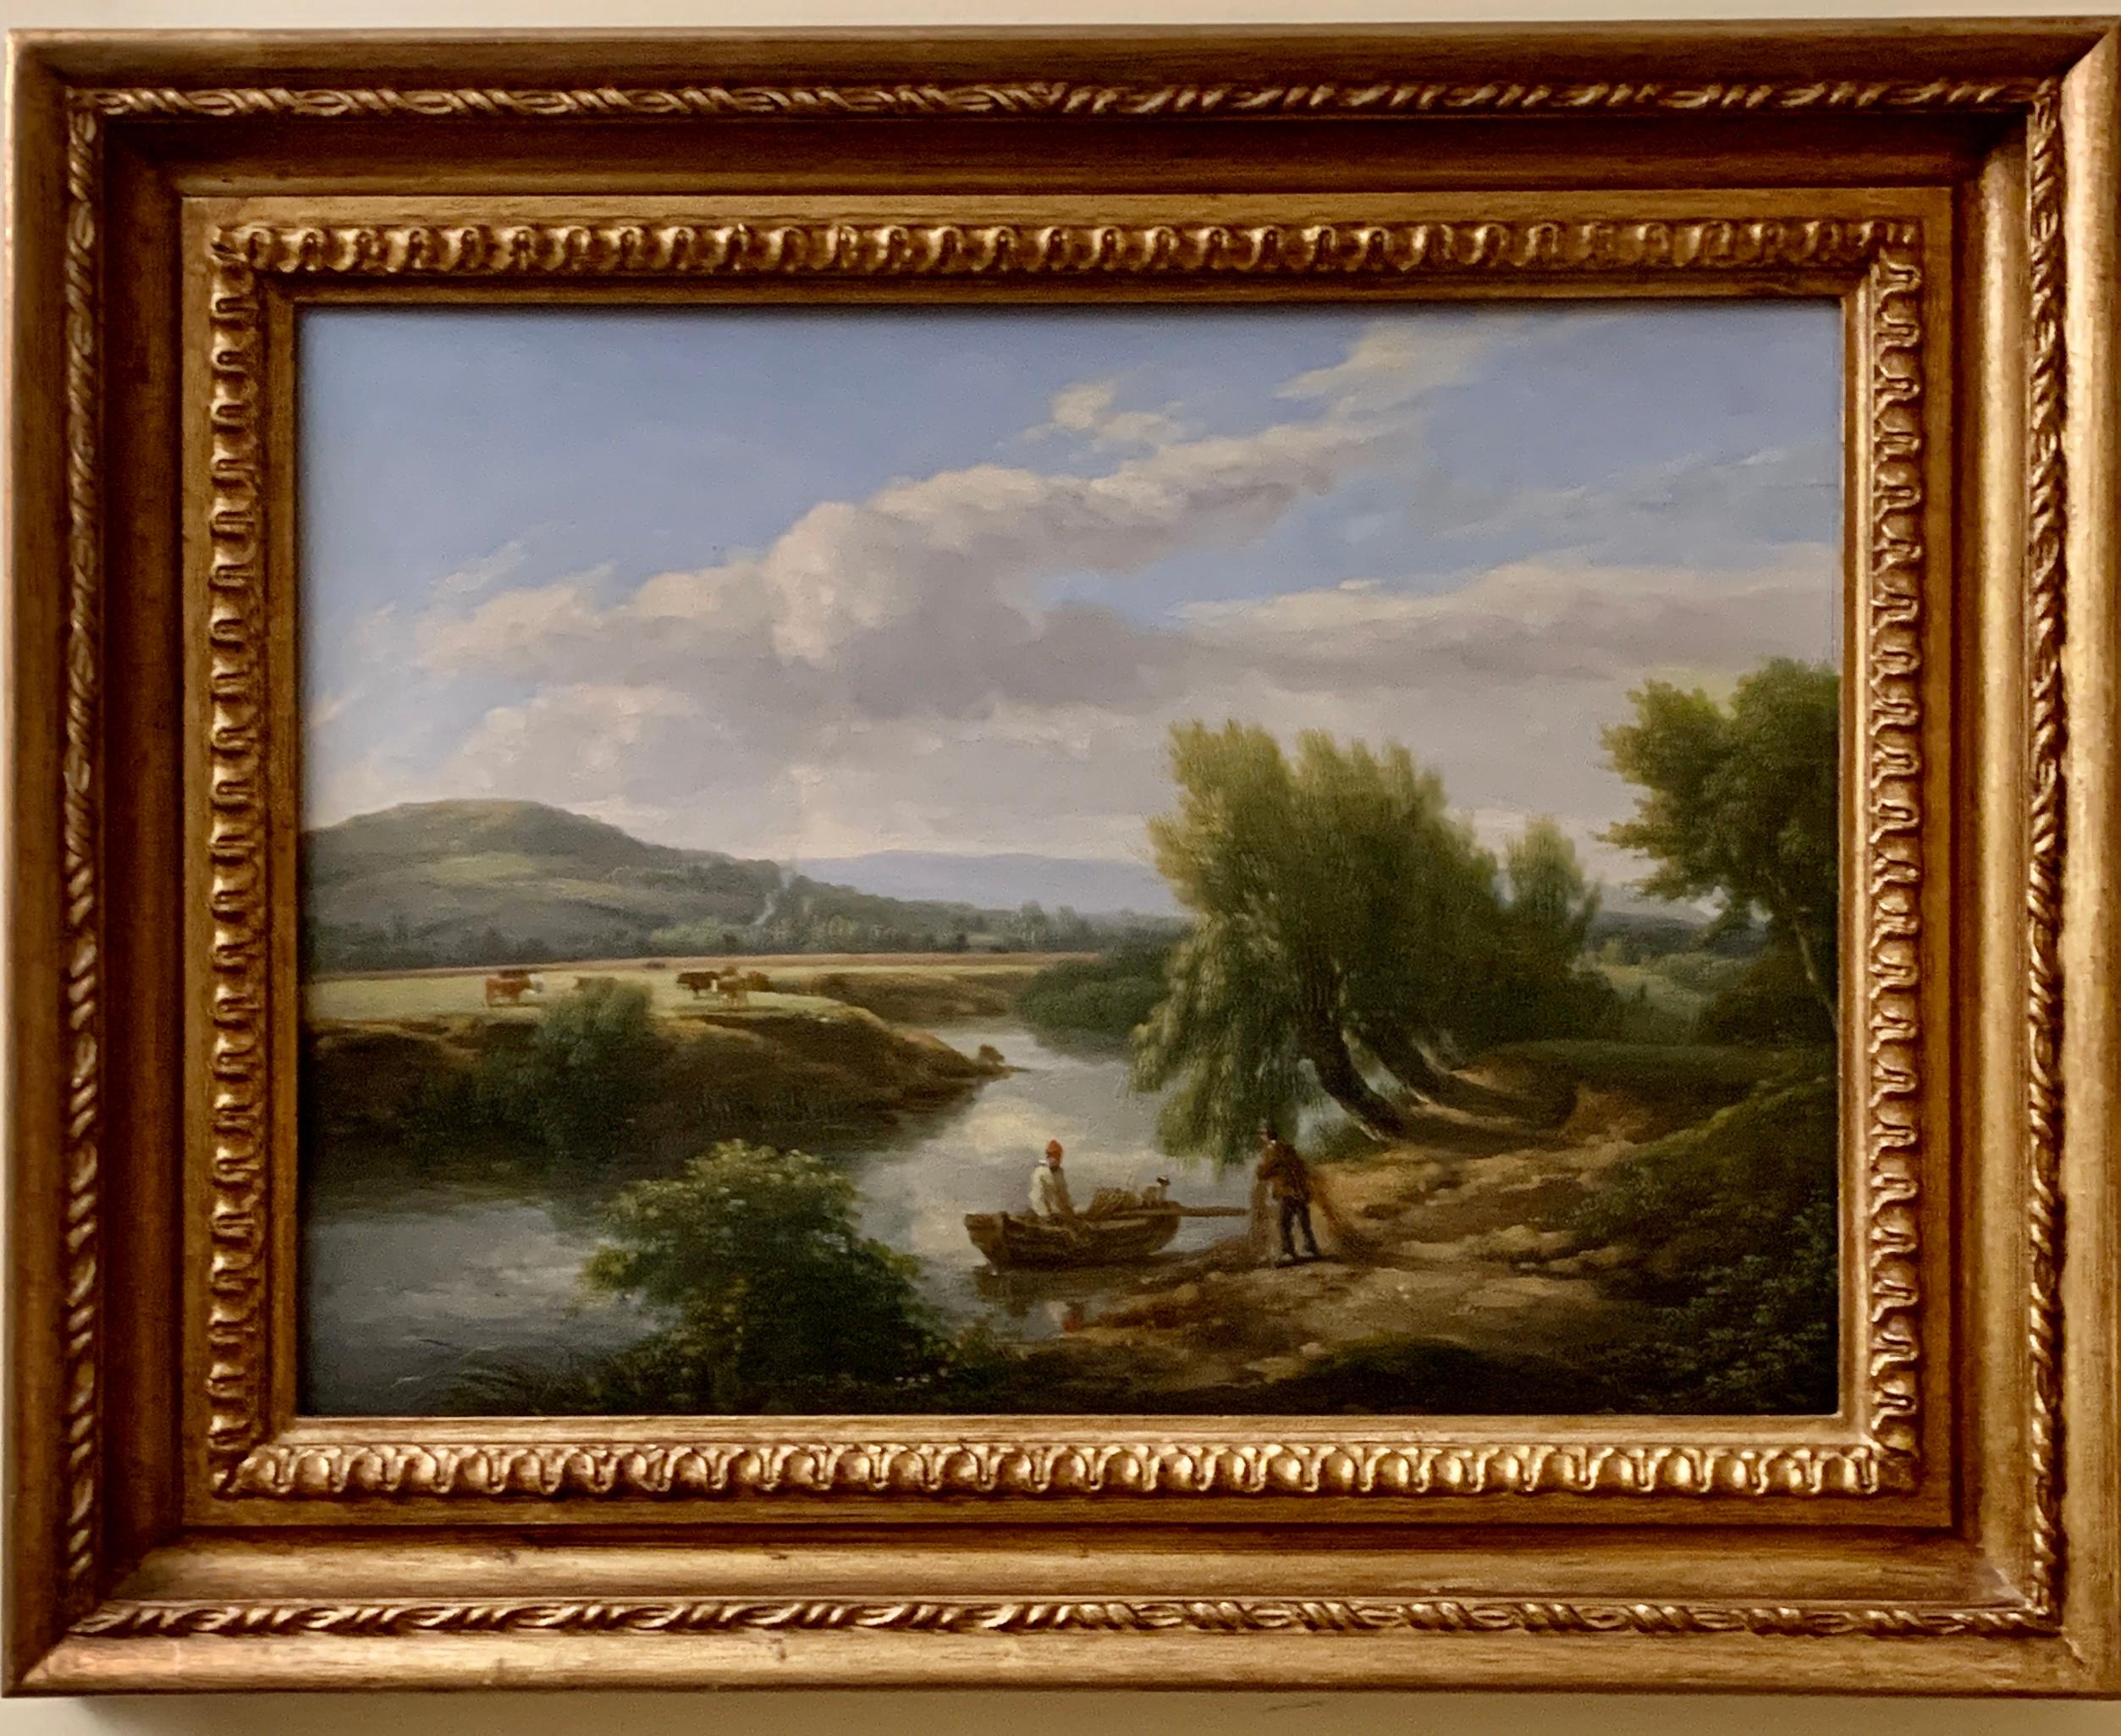 Arthur Hawkes Landscape Painting - English Victorian 19th century River landscape with fishermen, cows and trees